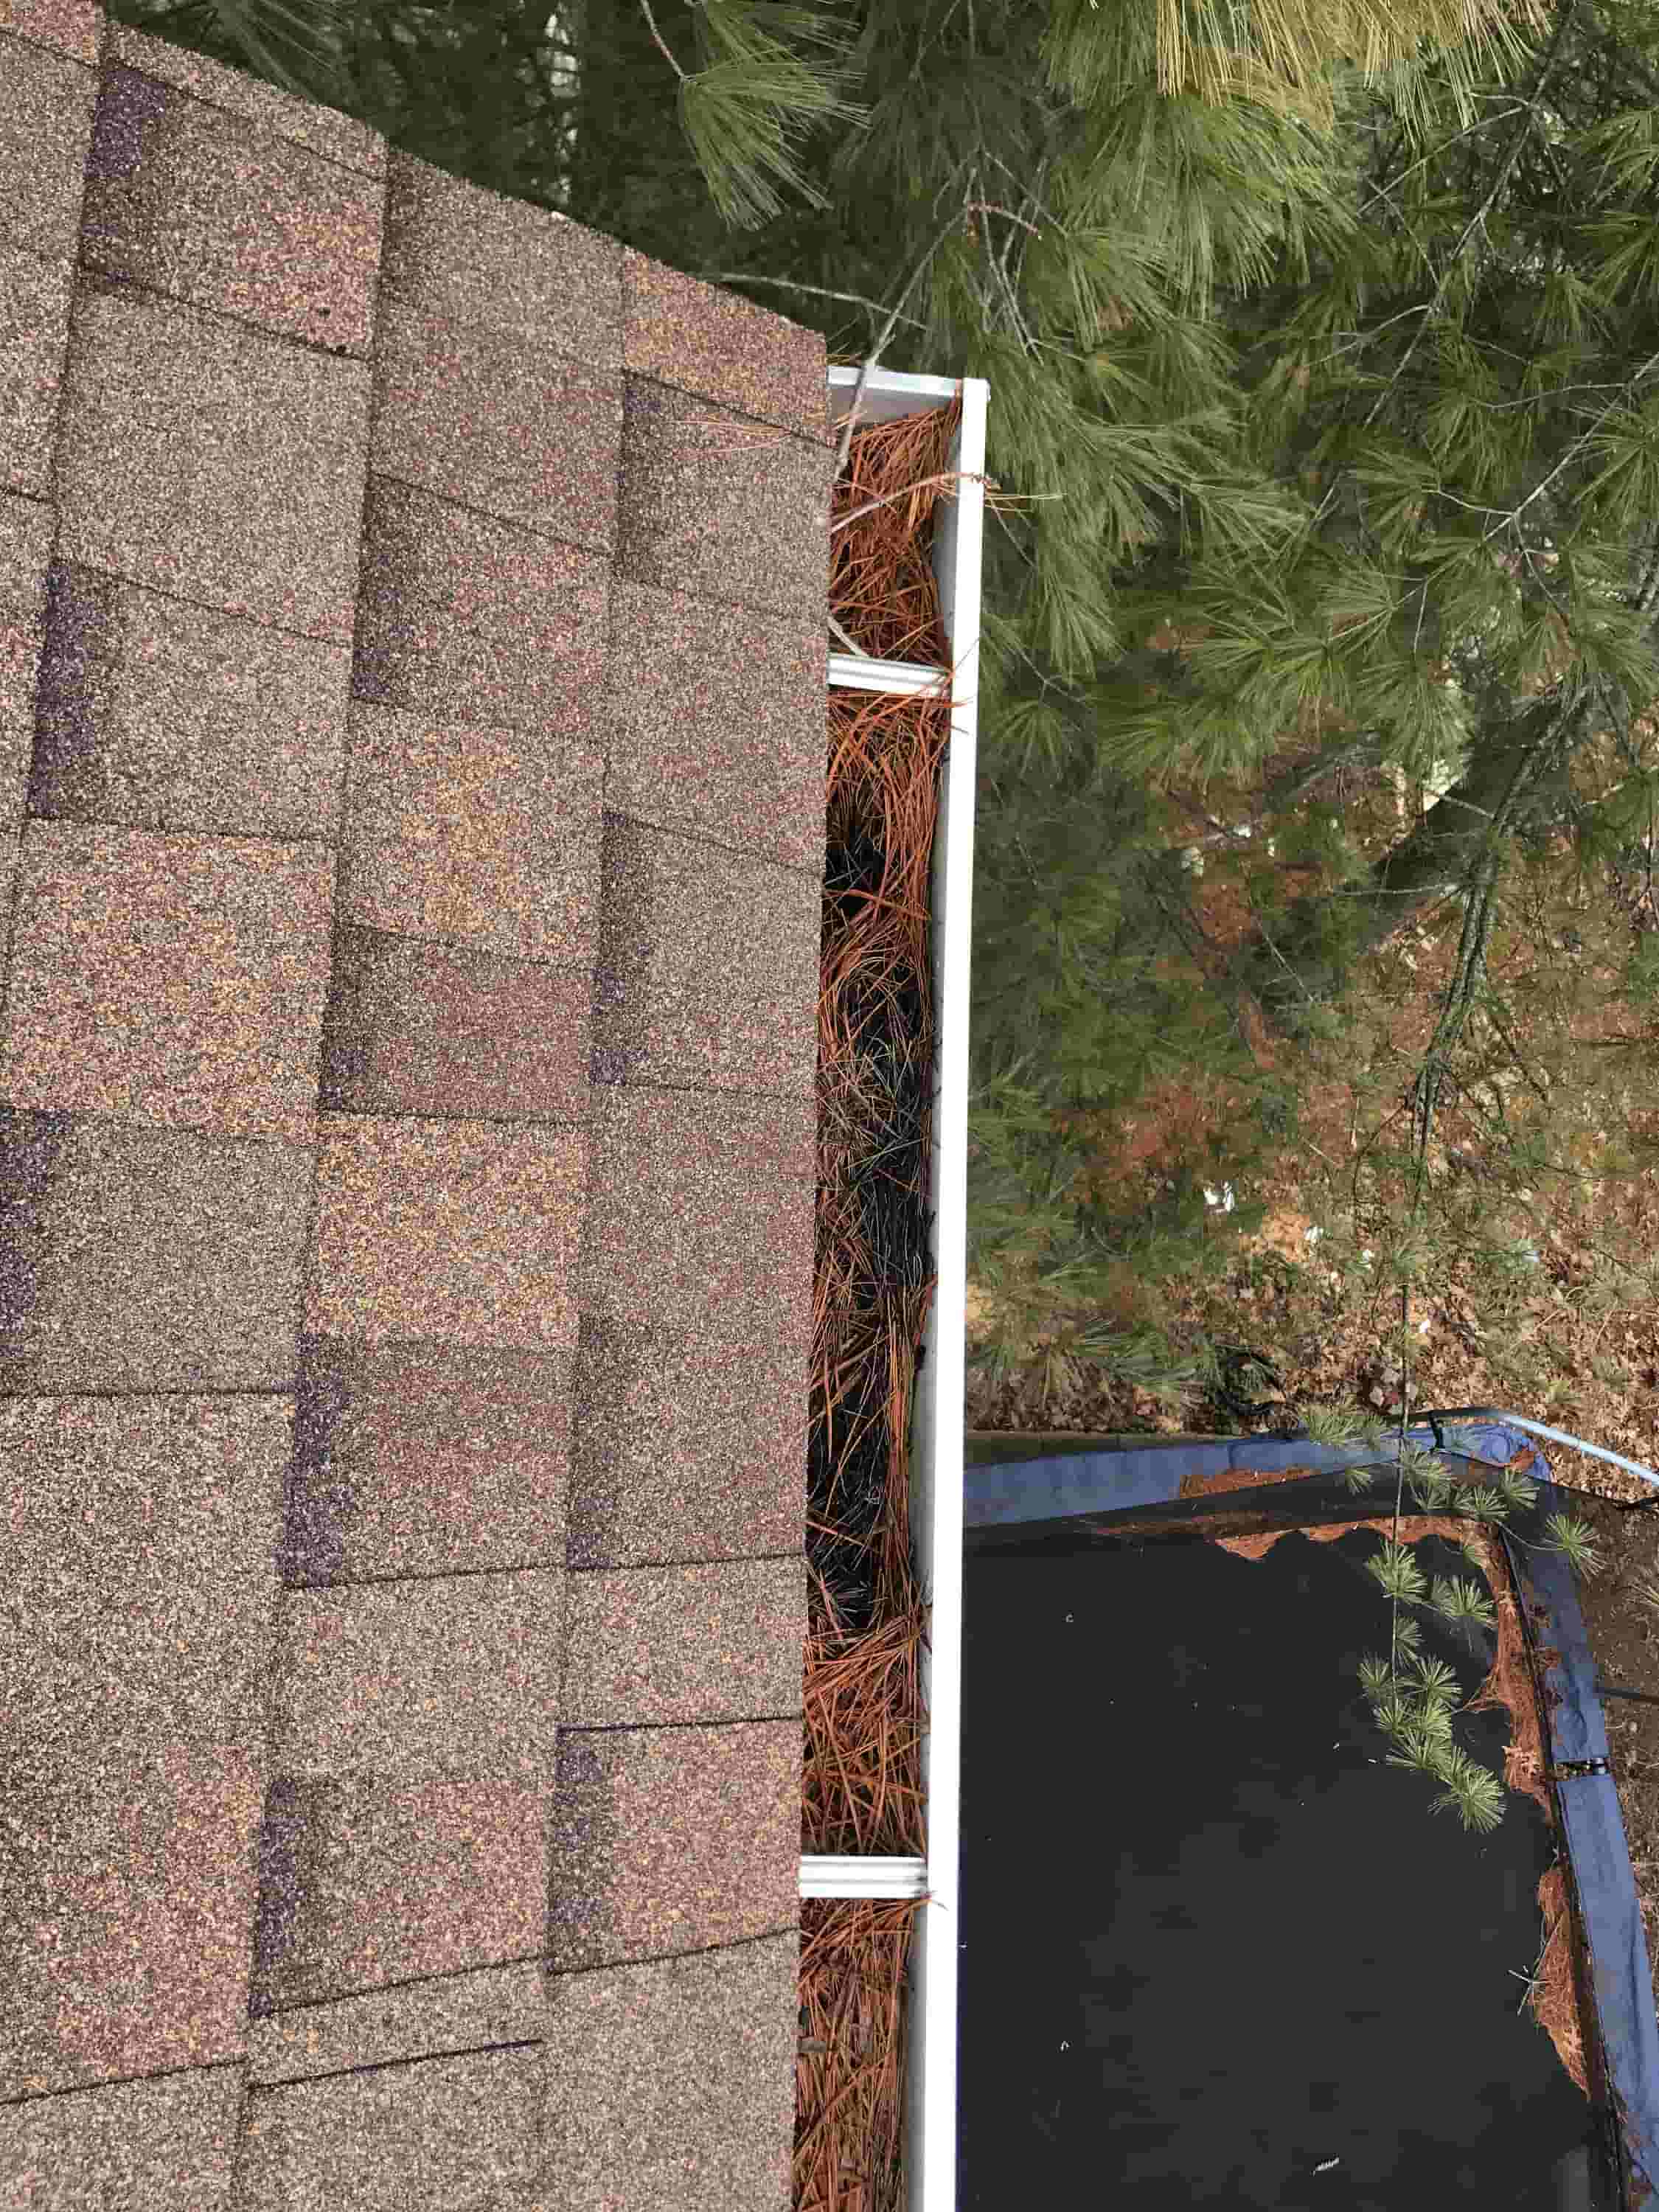 gutter cleaning average cost